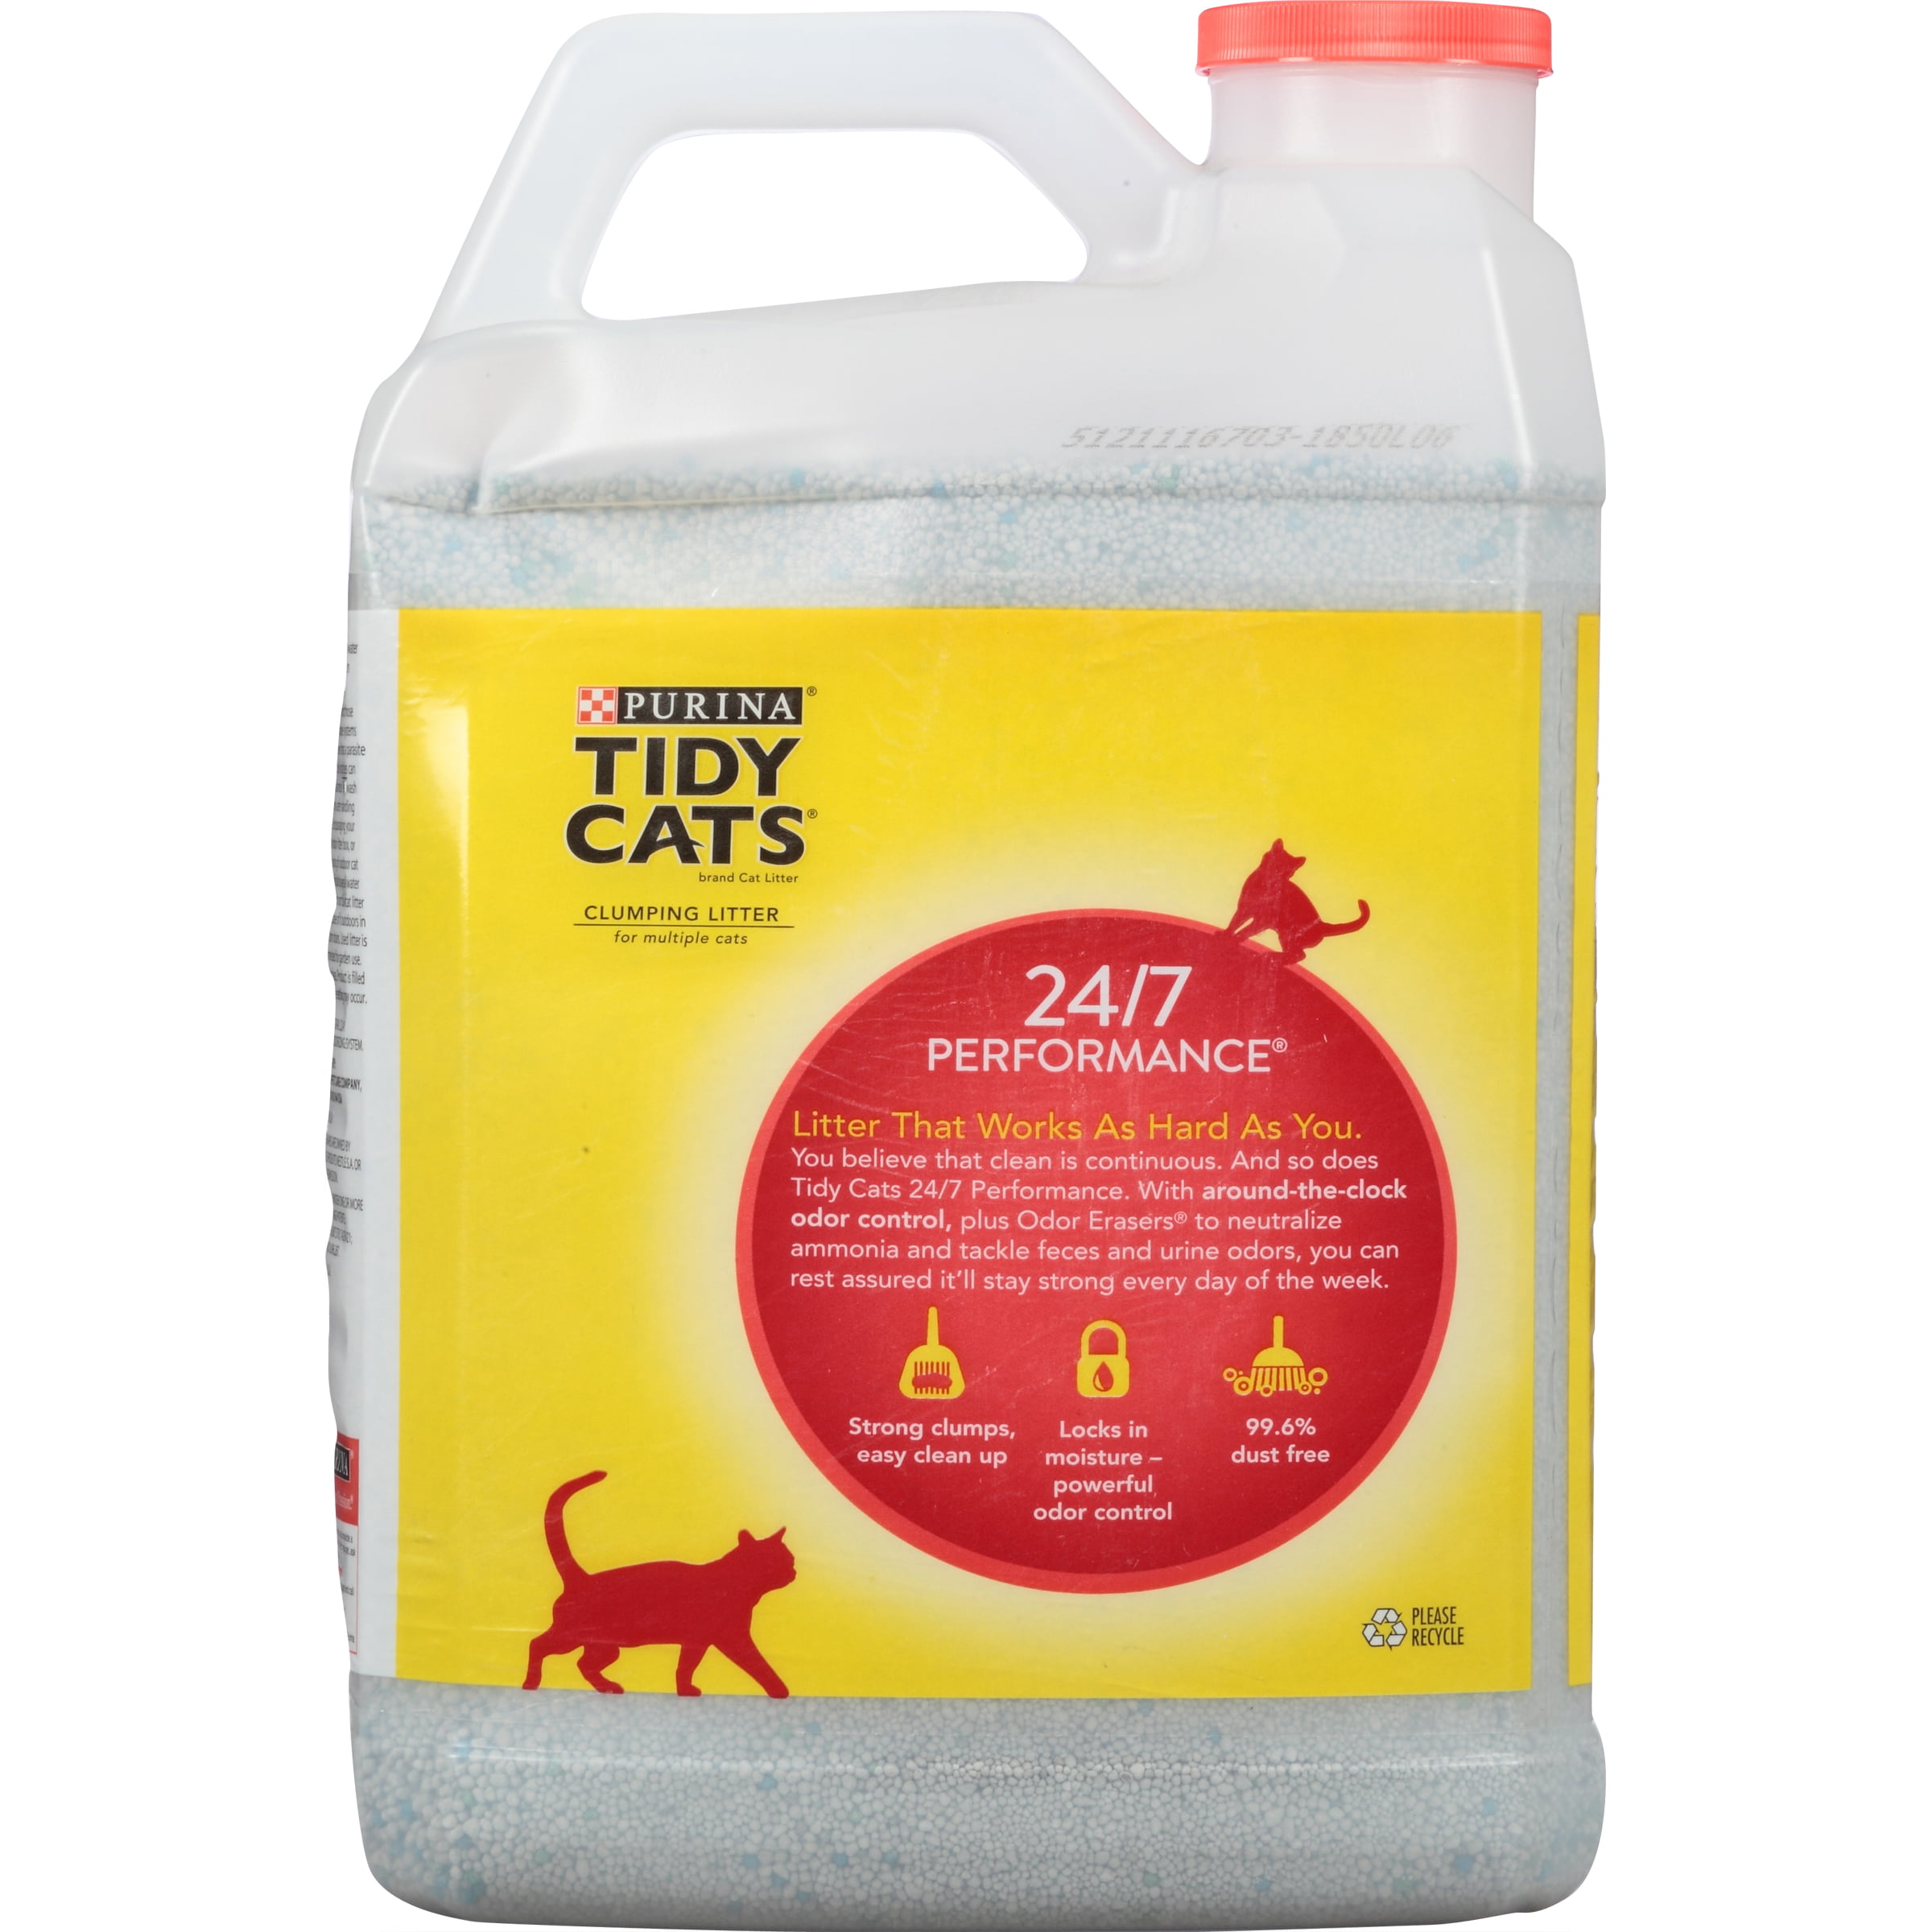 Purina Tidy Cats Clumping Litter 24/7 Performance for Multiple ...